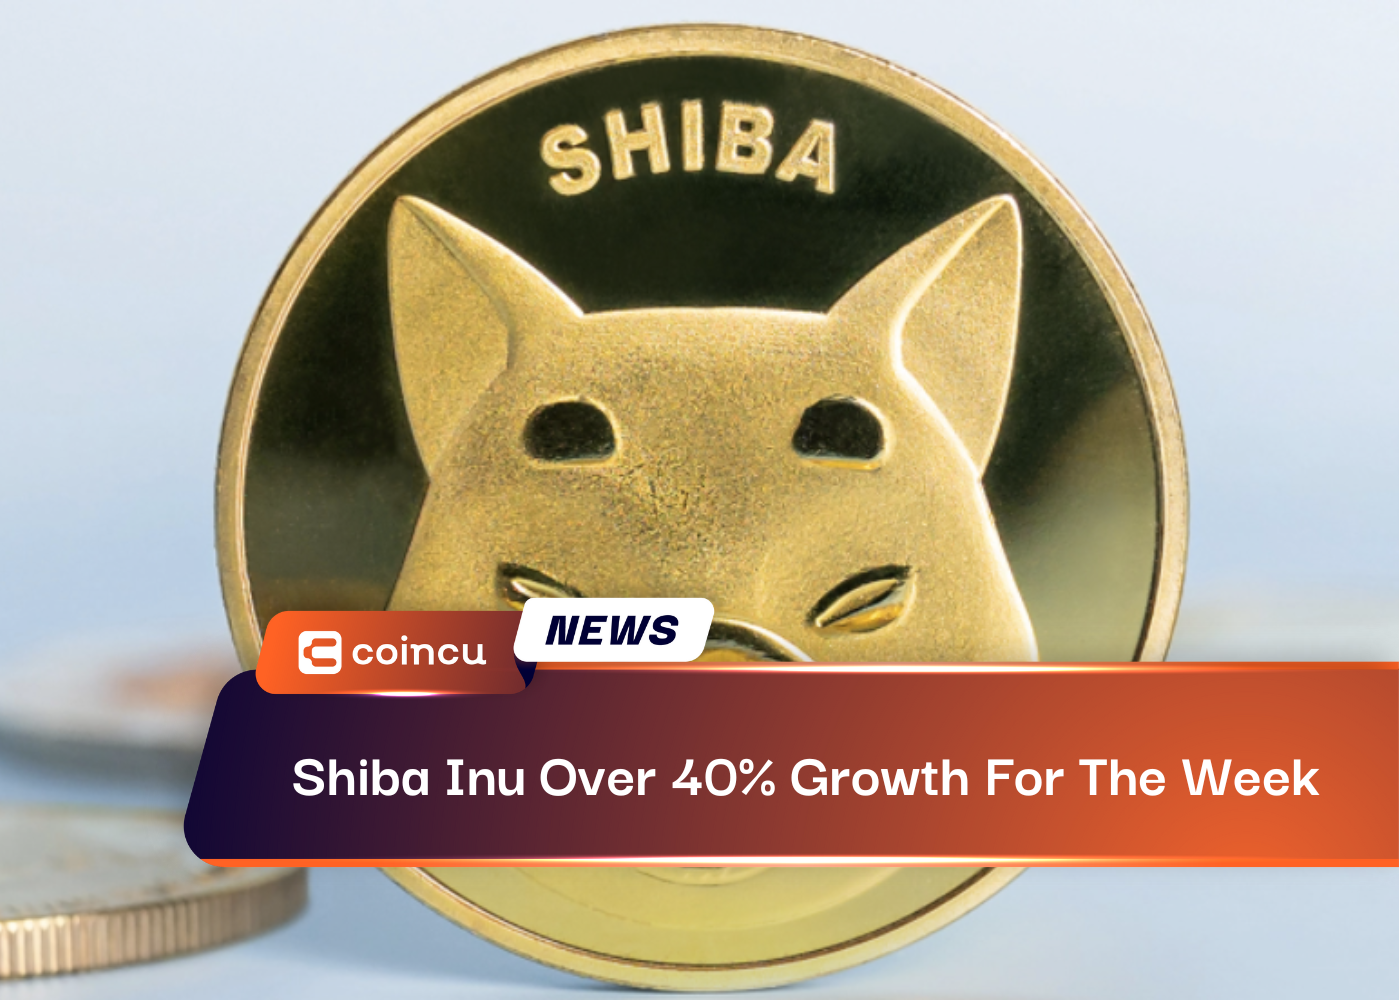 Shiba Inu Over 40% Growth For The Week